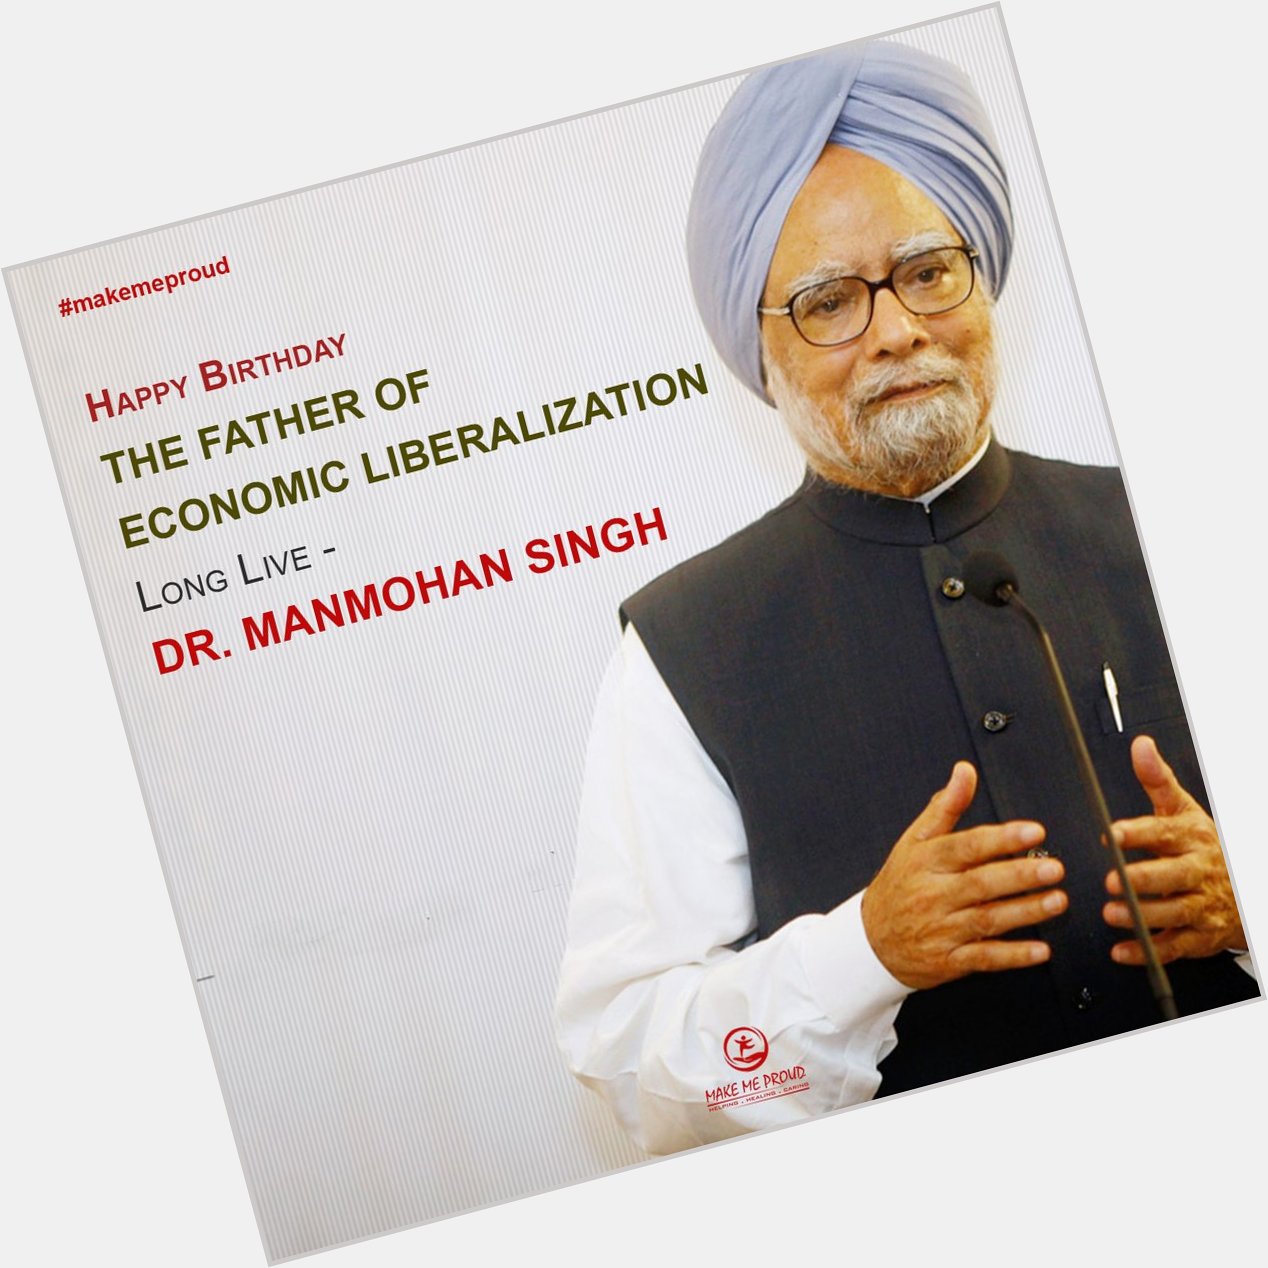  Happy Birthday the Father of Economic Liberalization, Long Live -  Dr. Manmohan Singh. 